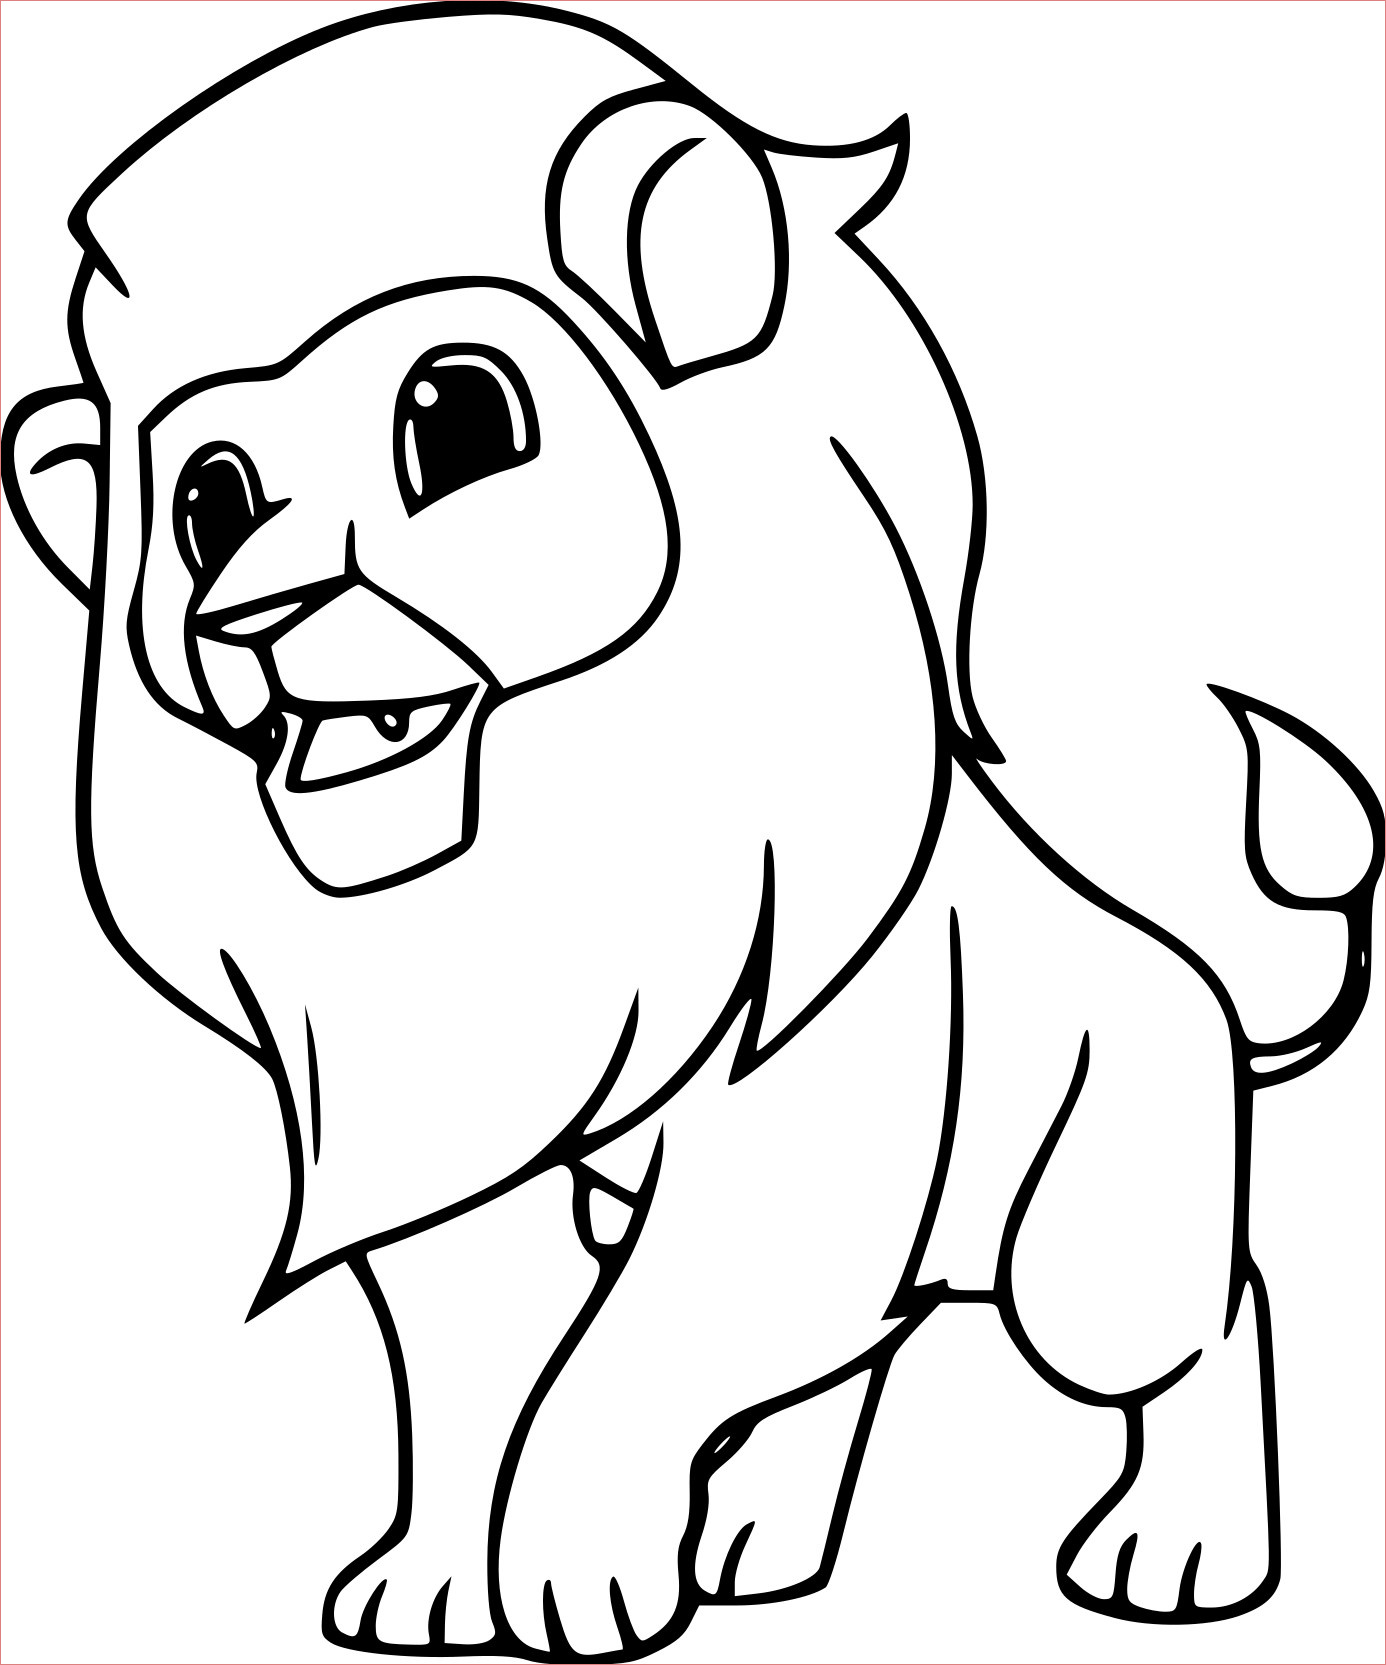 Coloriage Animaux Sauvages Inspiration Coloriage Animal Sauvage Lion à Imprimer Sur Coloriages Fo